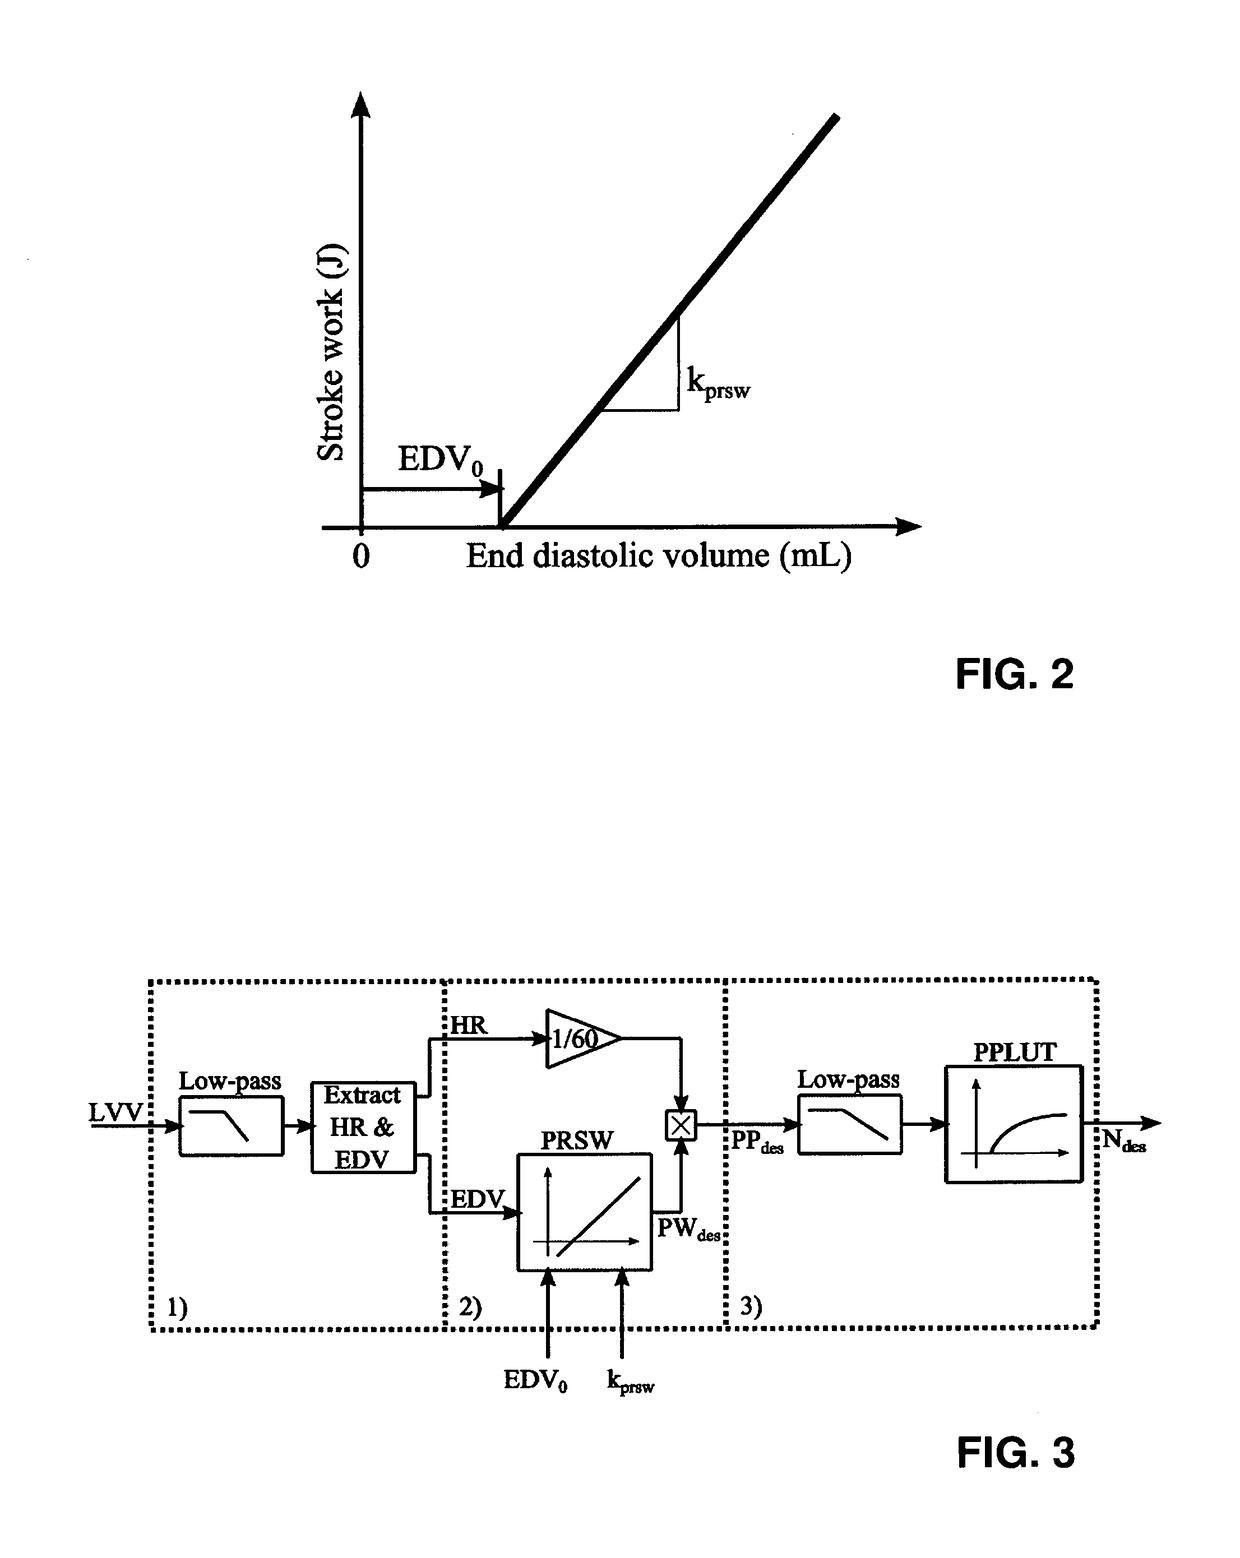 Biomedical apparatus for pumping blood of a human or an animal patient through a secondary intra- or extracorporeal blood circuit